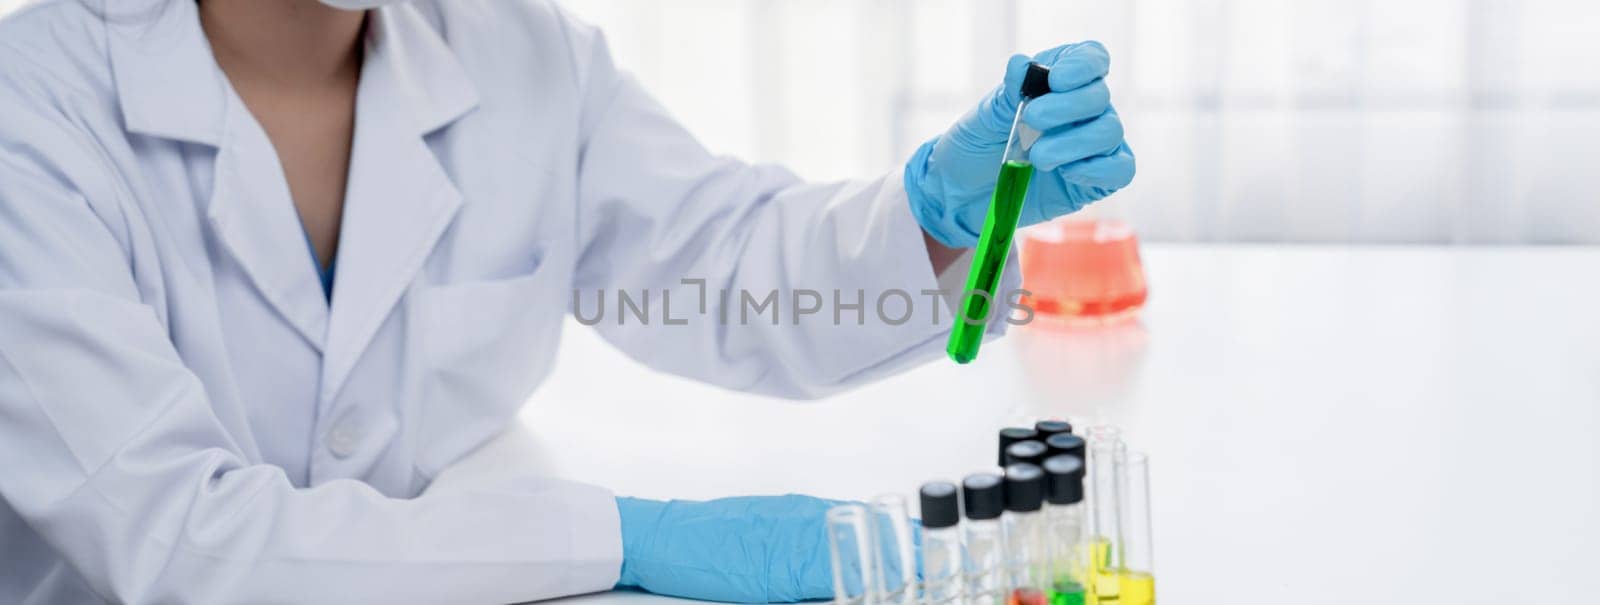 Laboratory researcher develop new medicine or cure using colorful chemical liquid in lab tube. Technological advance of healthcare with scientific expertise with laboratory equipment. Panorama Rigid